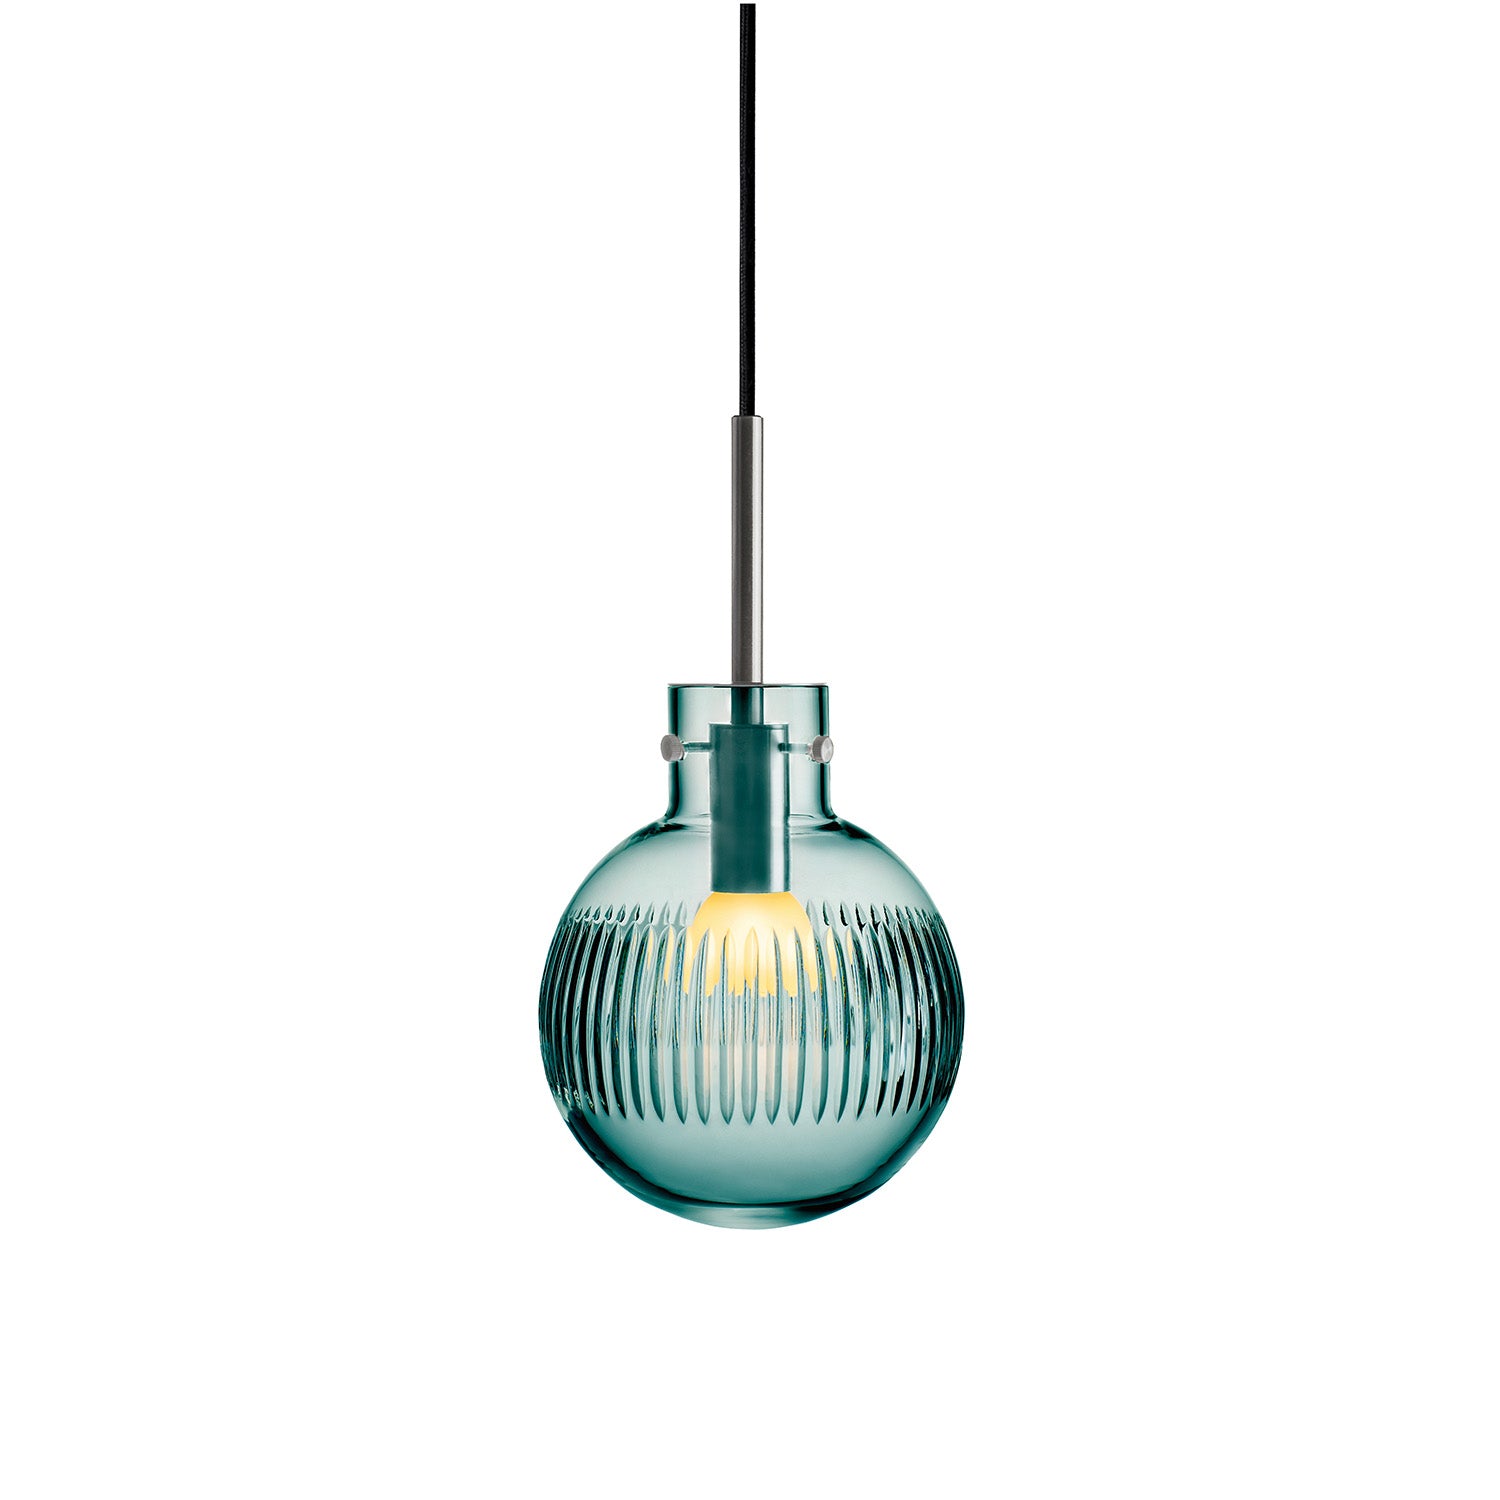 LINES - Handcrafted blown glass pendant lamp